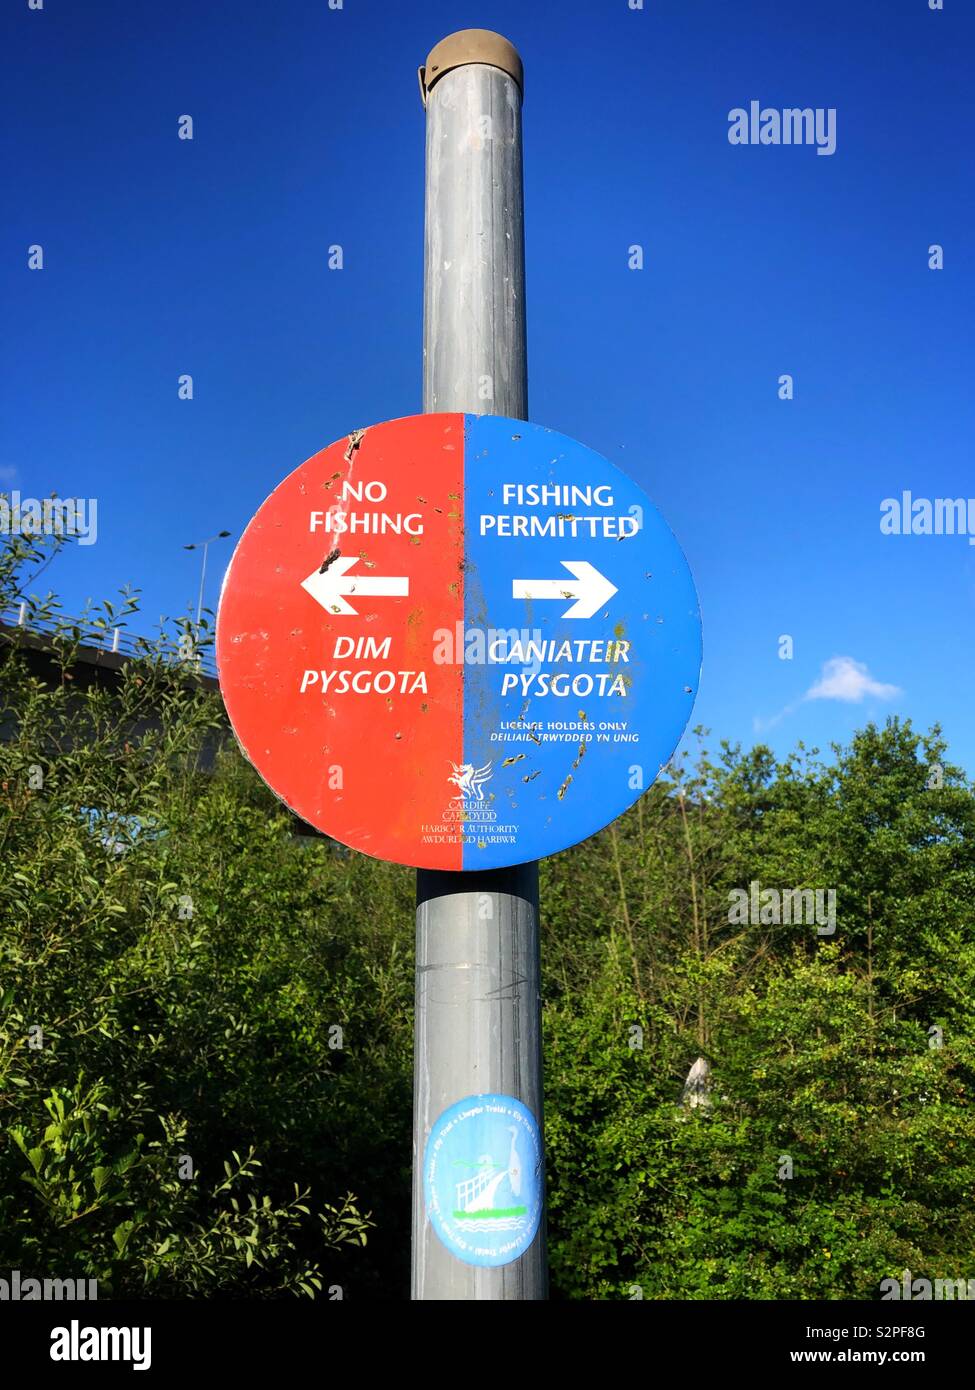 Bilingual Fishing / No Fishing sign in English and Welsh along the River Ely, Cardiff Bay, South Wales. Stock Photo